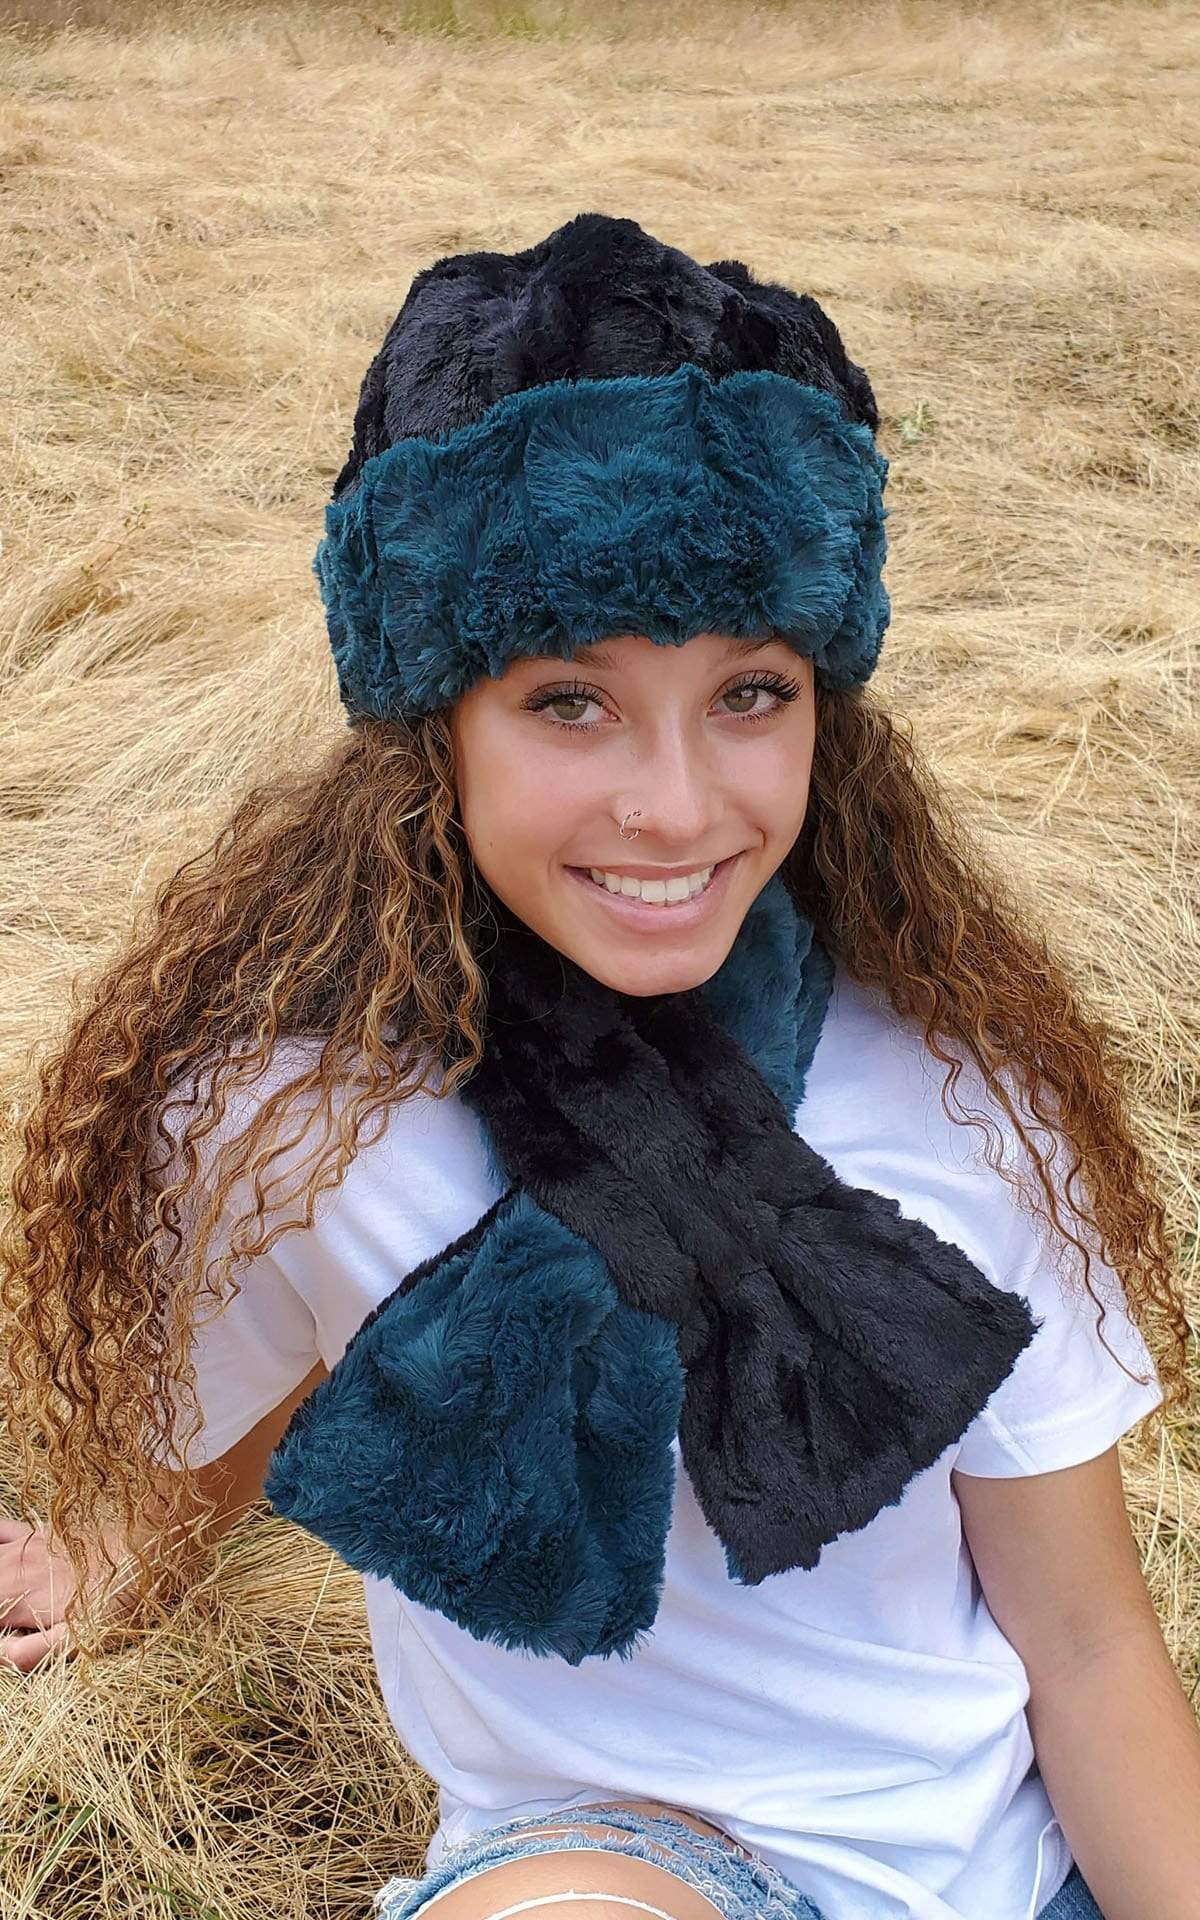  Model sitting in field wearing a Beanie and a matching  Women’s Pull Through Scarf shown in reverse Peacock Pond Faux Fur, Blue / Teal with Cuddly Faux Fur in Black | Handmade in Seattle WA | Pandemonium Millinery